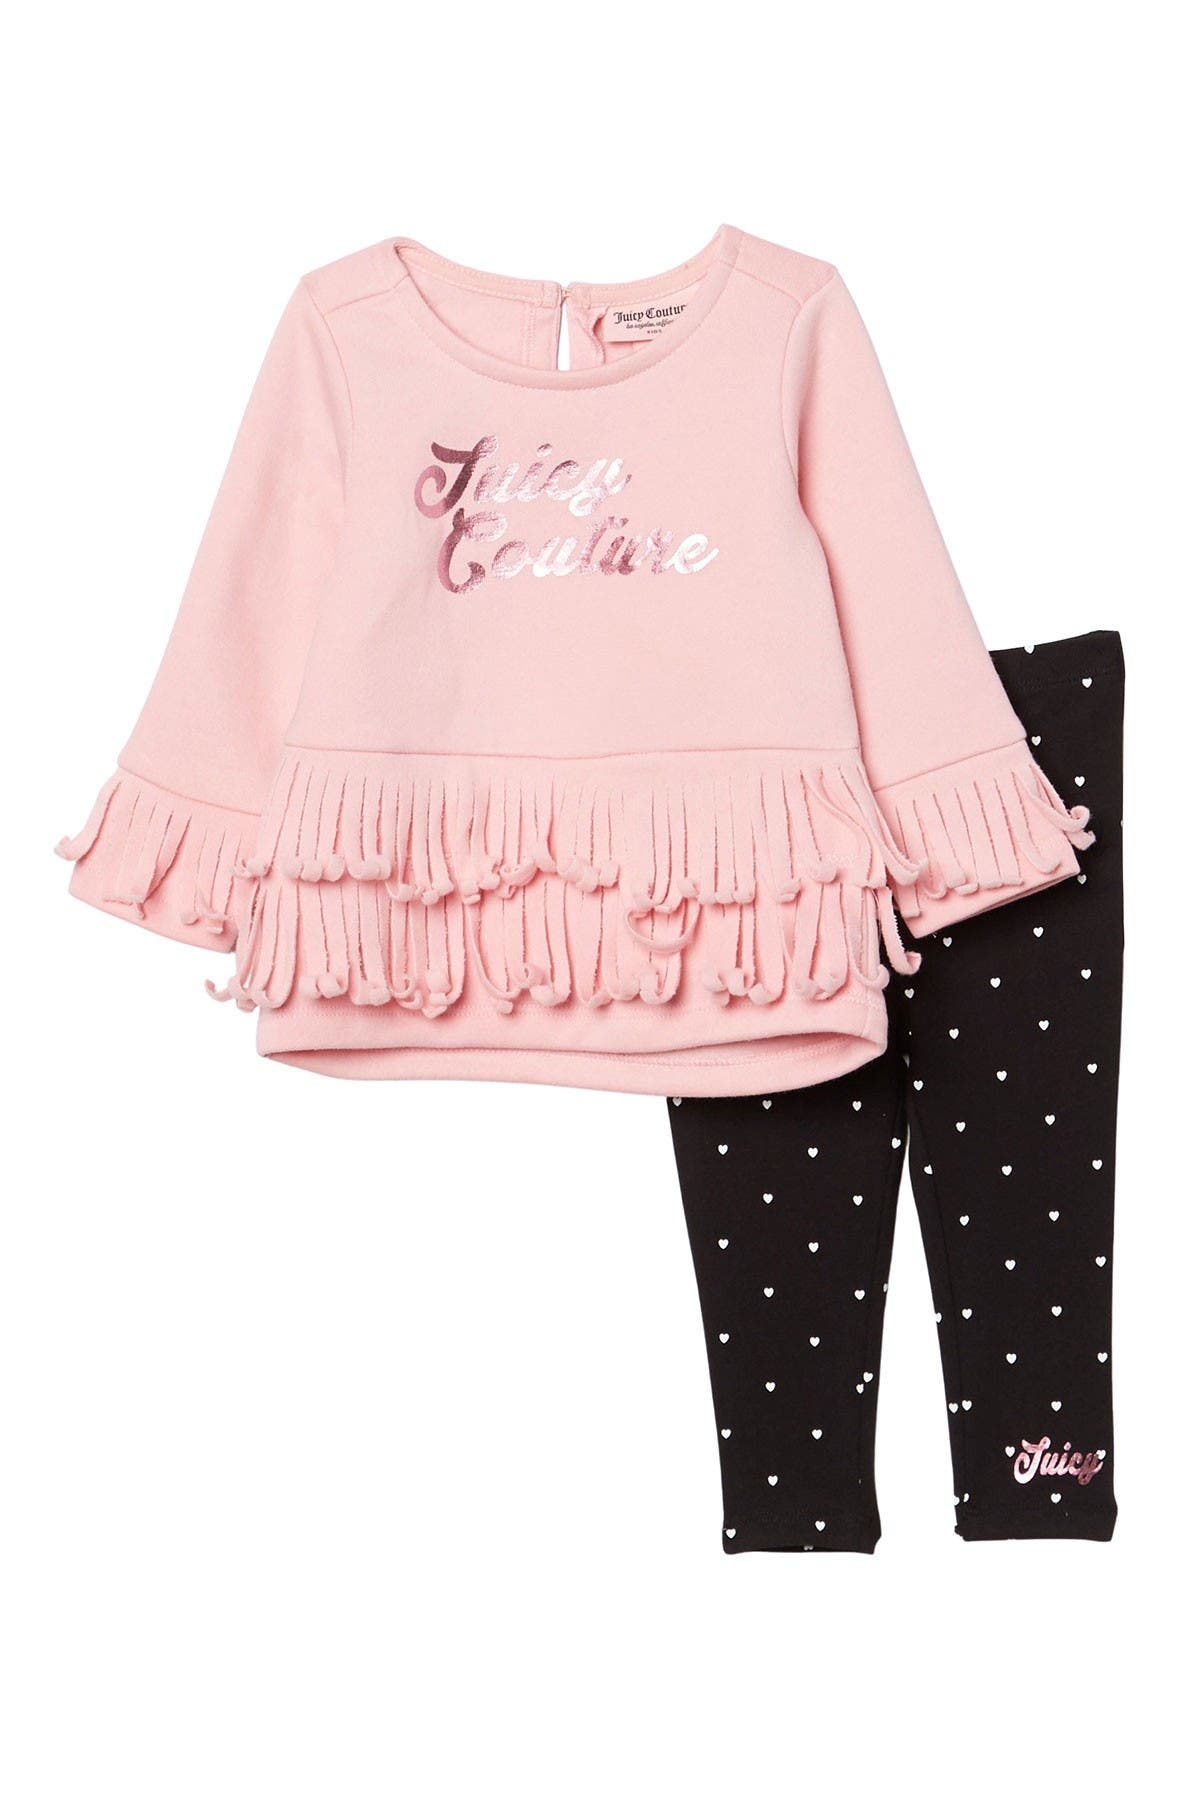 Juicy Couture Kids' Clothing 